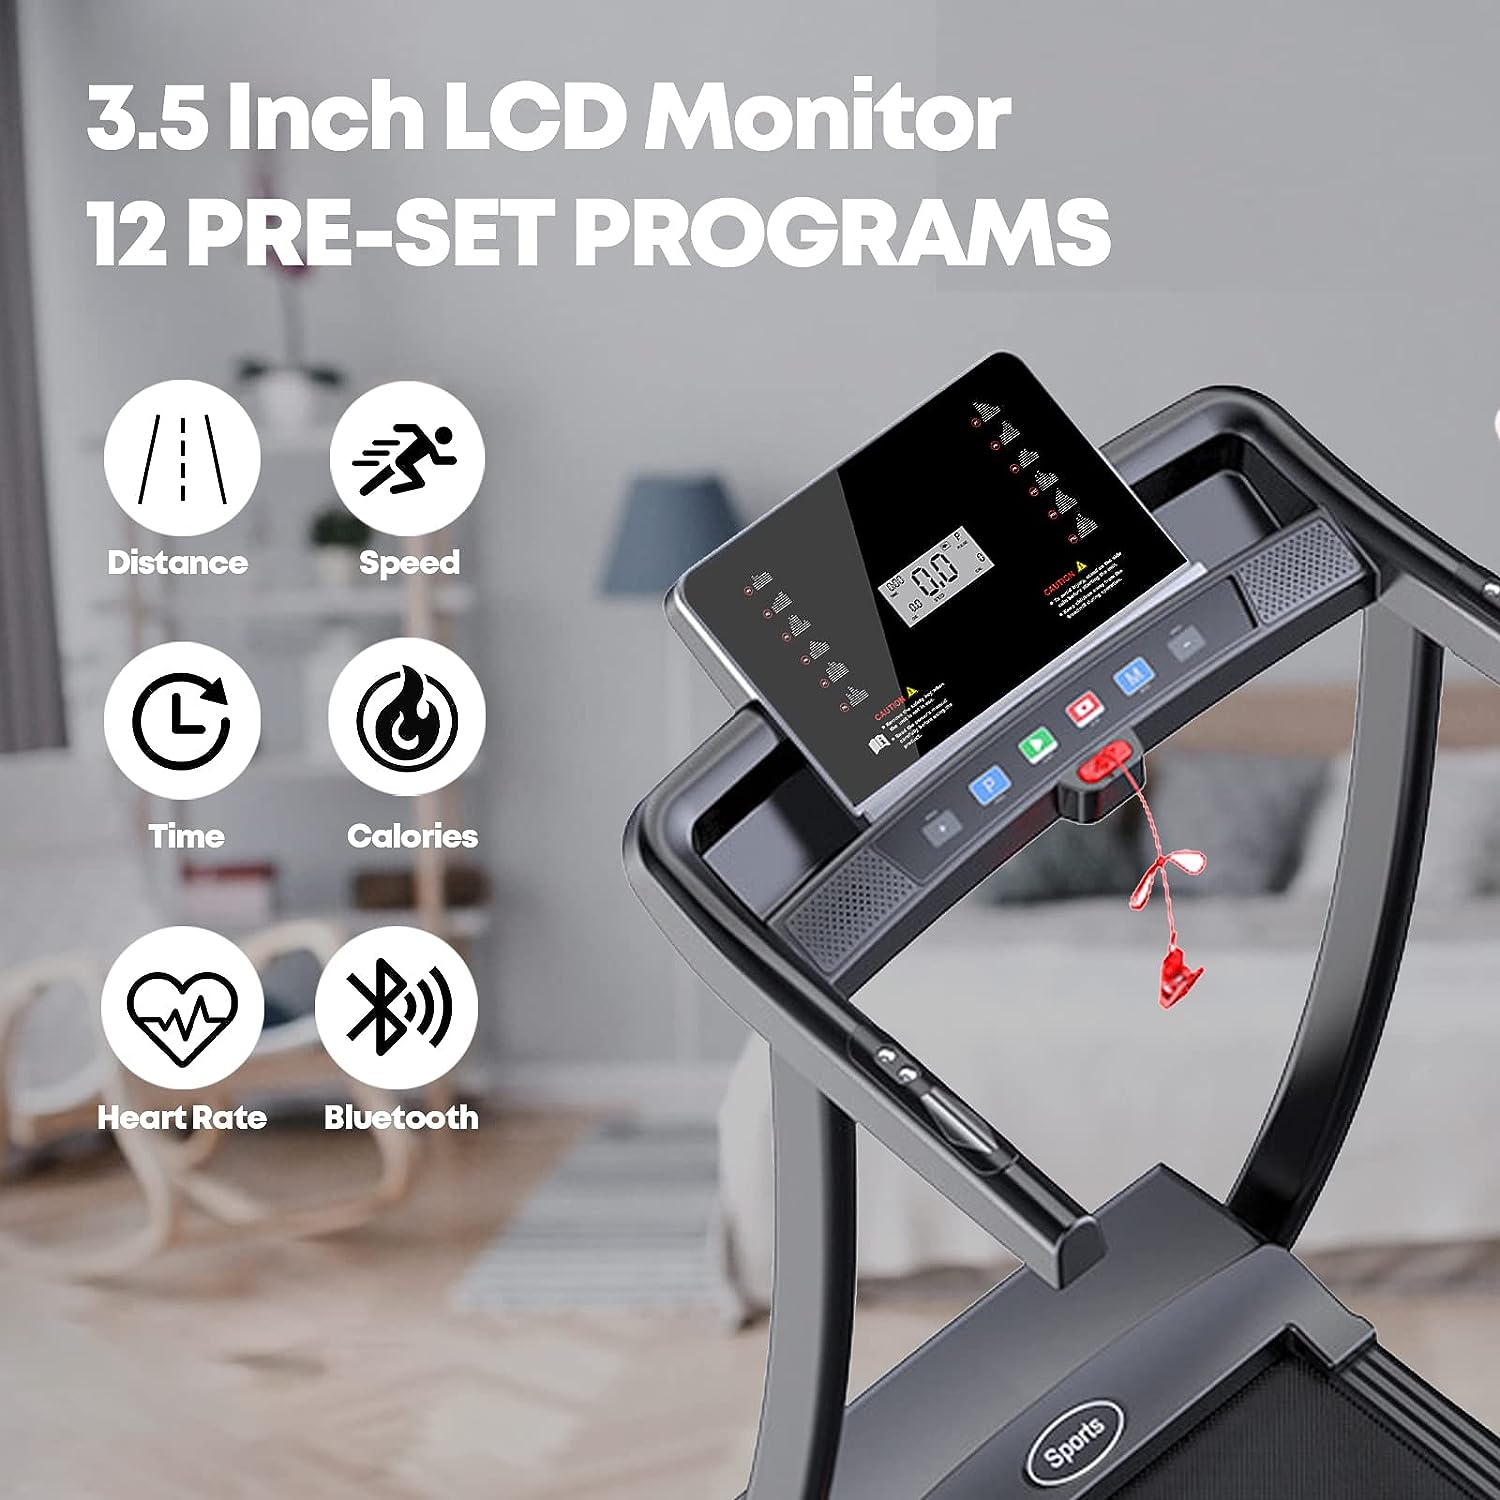 Treadmill, Folding Treadmill with Manual Incline for Walking  Running, LCD Display, Built-in Bluetooth Speaker, Heart-Rate Sensor, Preset and Adjustable Programs